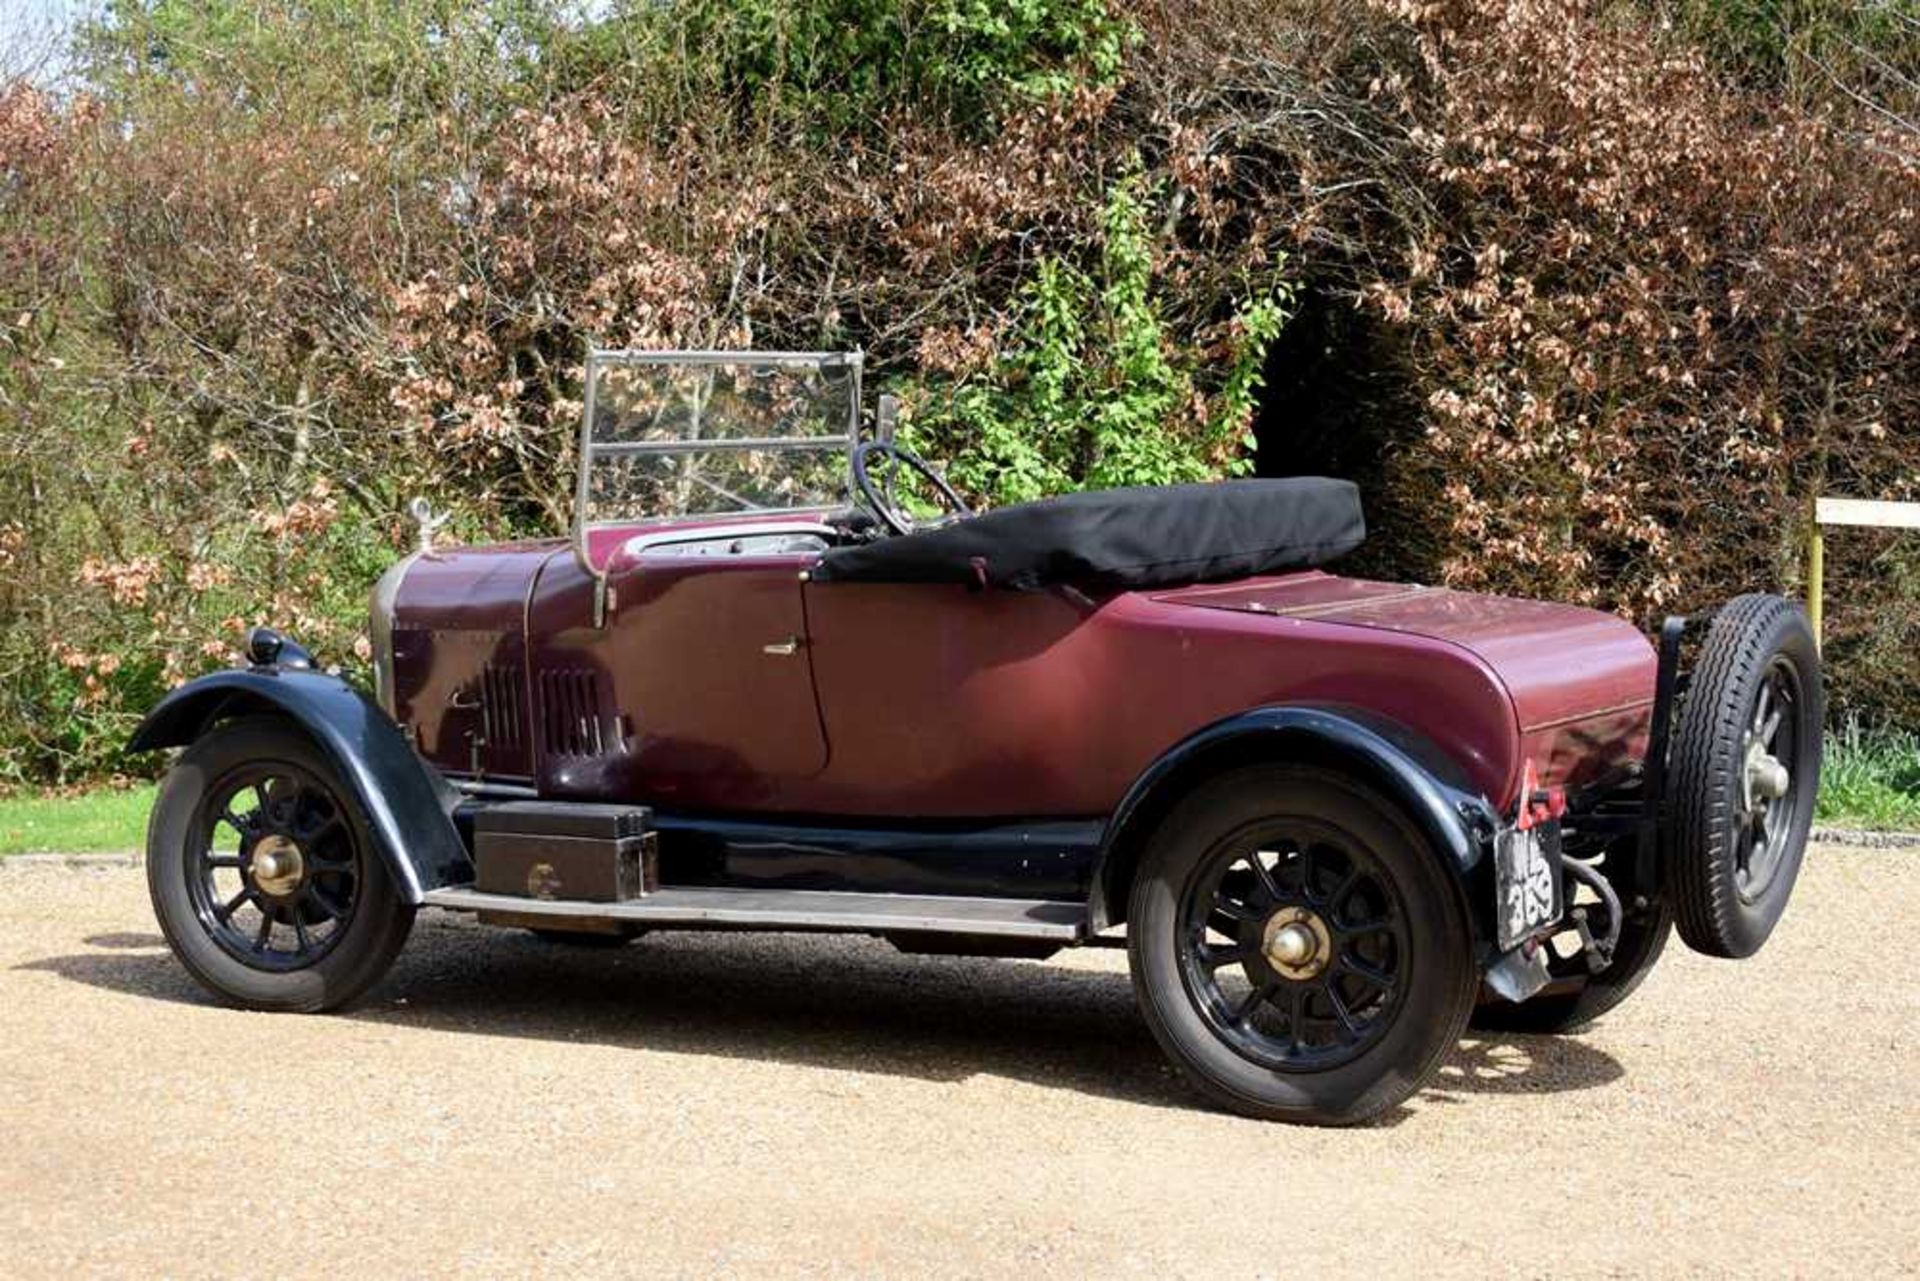 1926 Morris Oxford 'Bullnose' 2-Seat Tourer with Dickey - Image 20 of 99